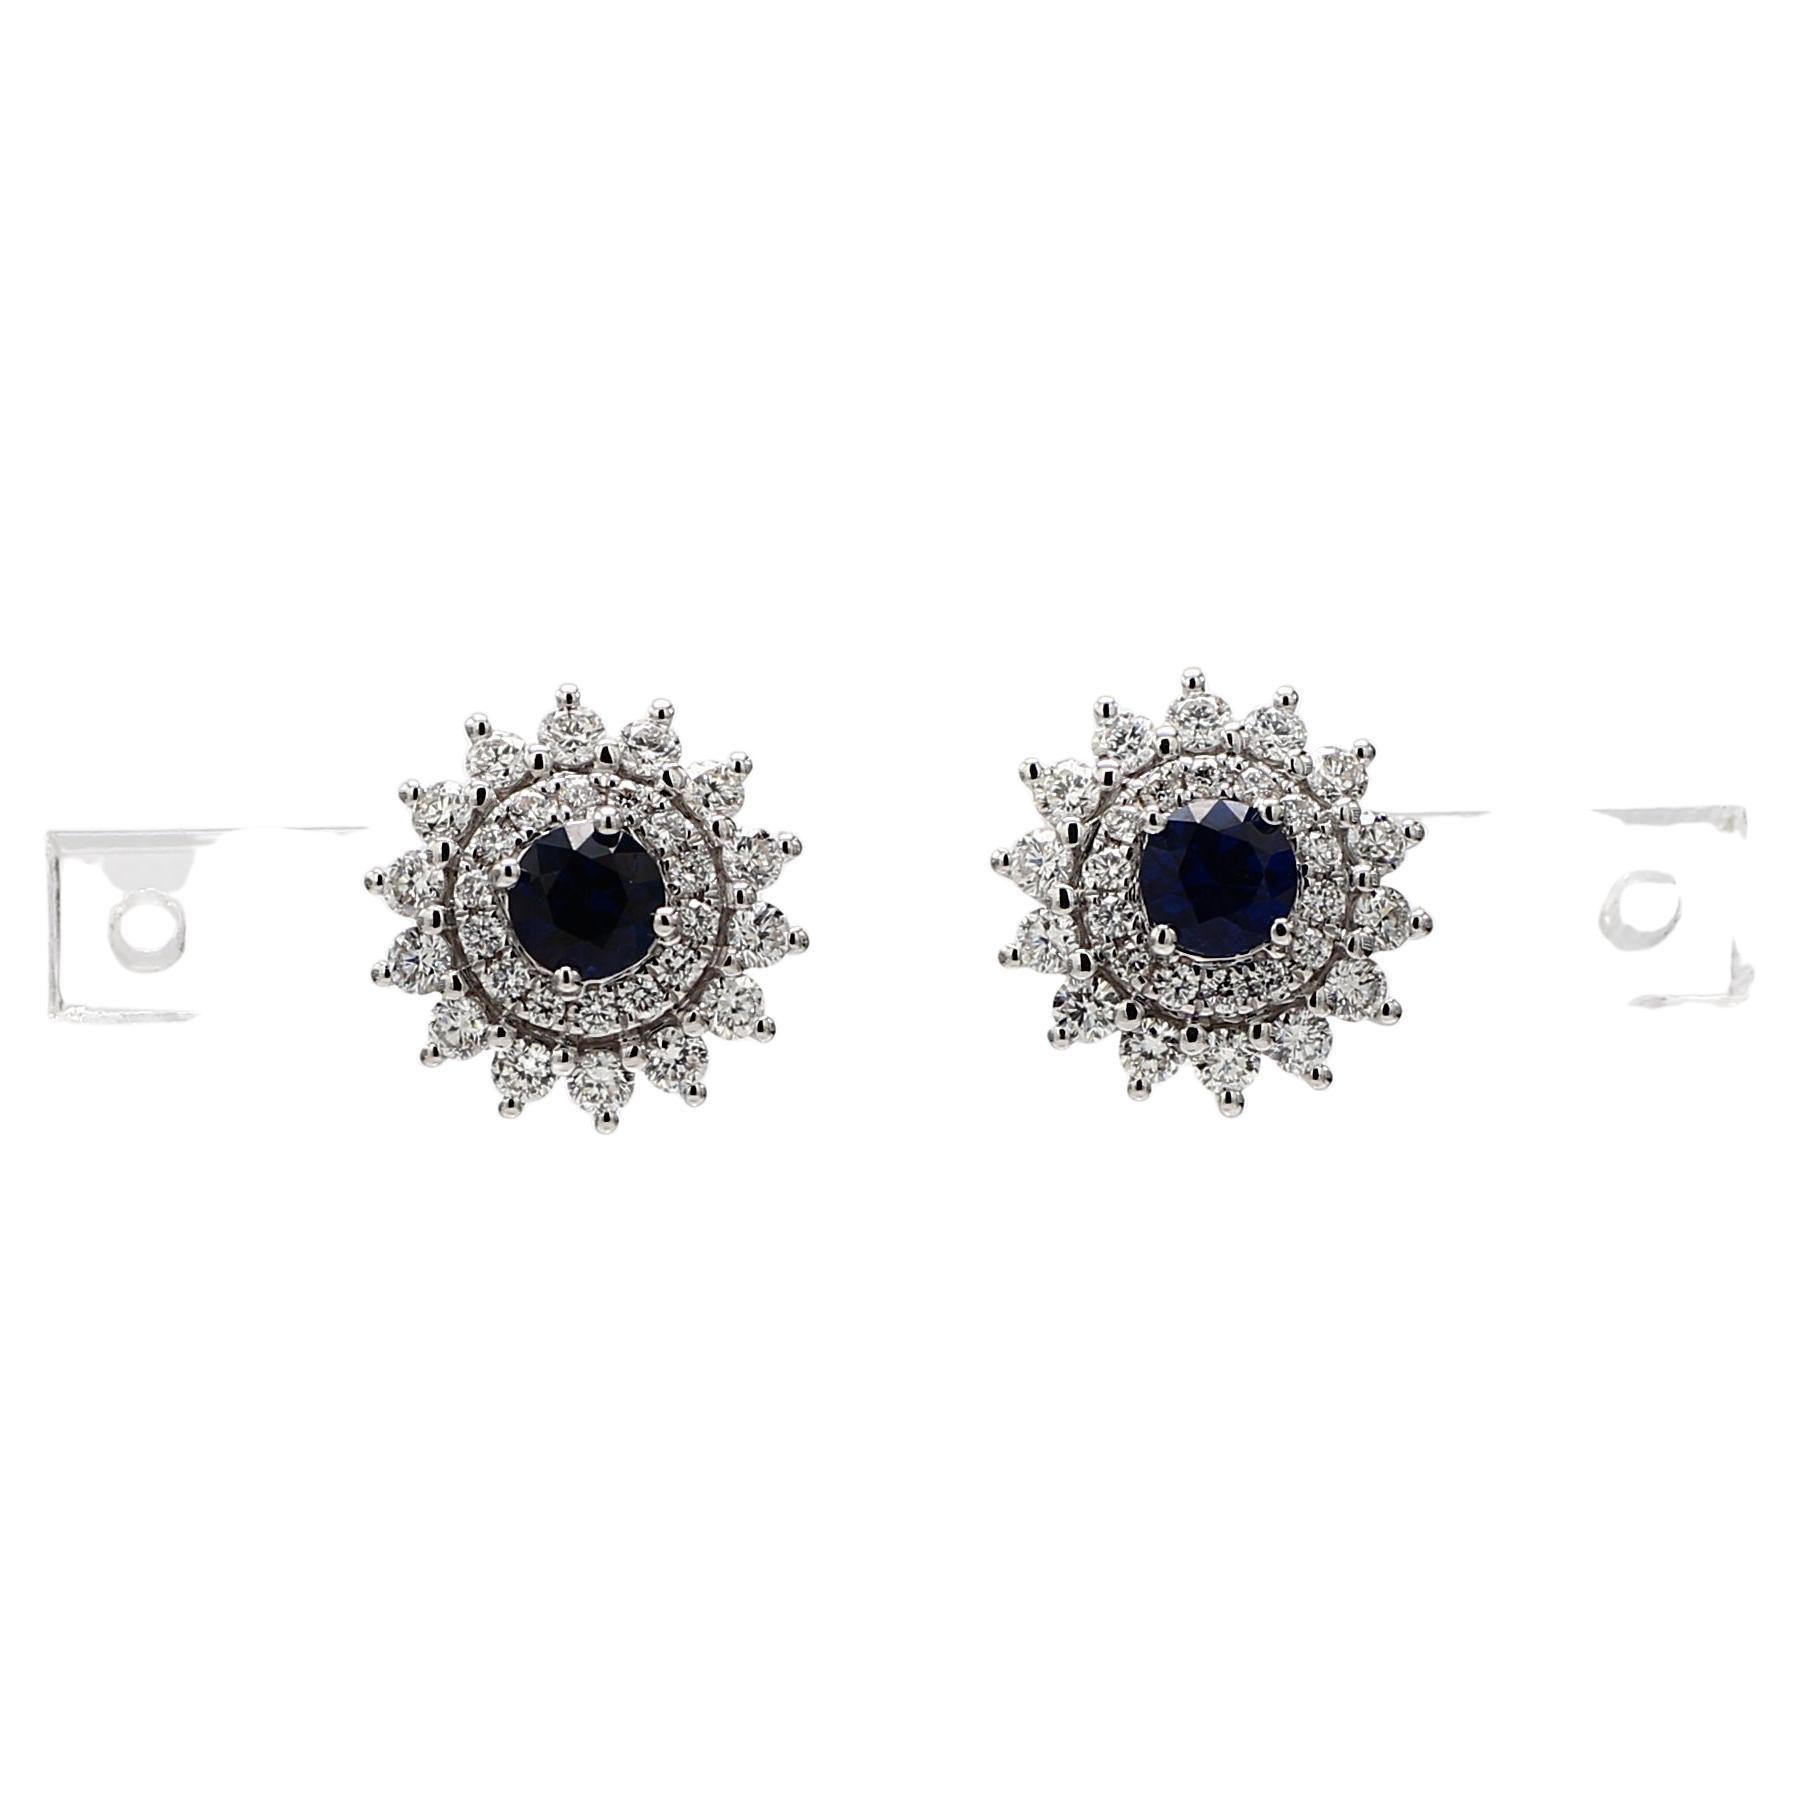 Edwardian Sapphire and Diamond Cluster Earrings, circa 1910 at 1stDibs